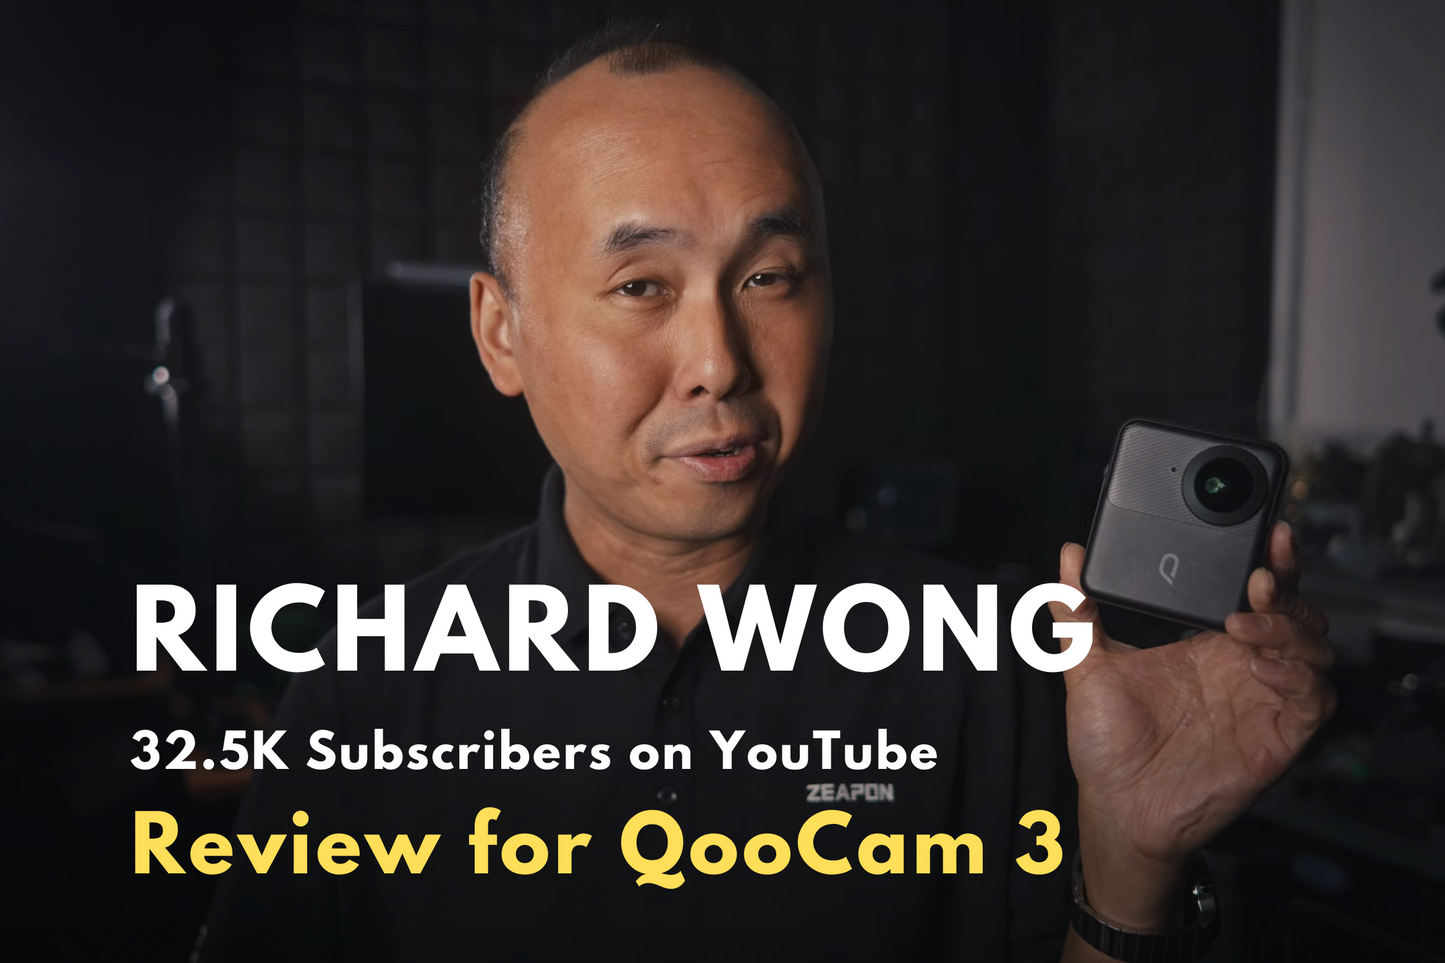 It's time to buy a 360 camera - Kandao QooCam 3 Review by Richard Wong